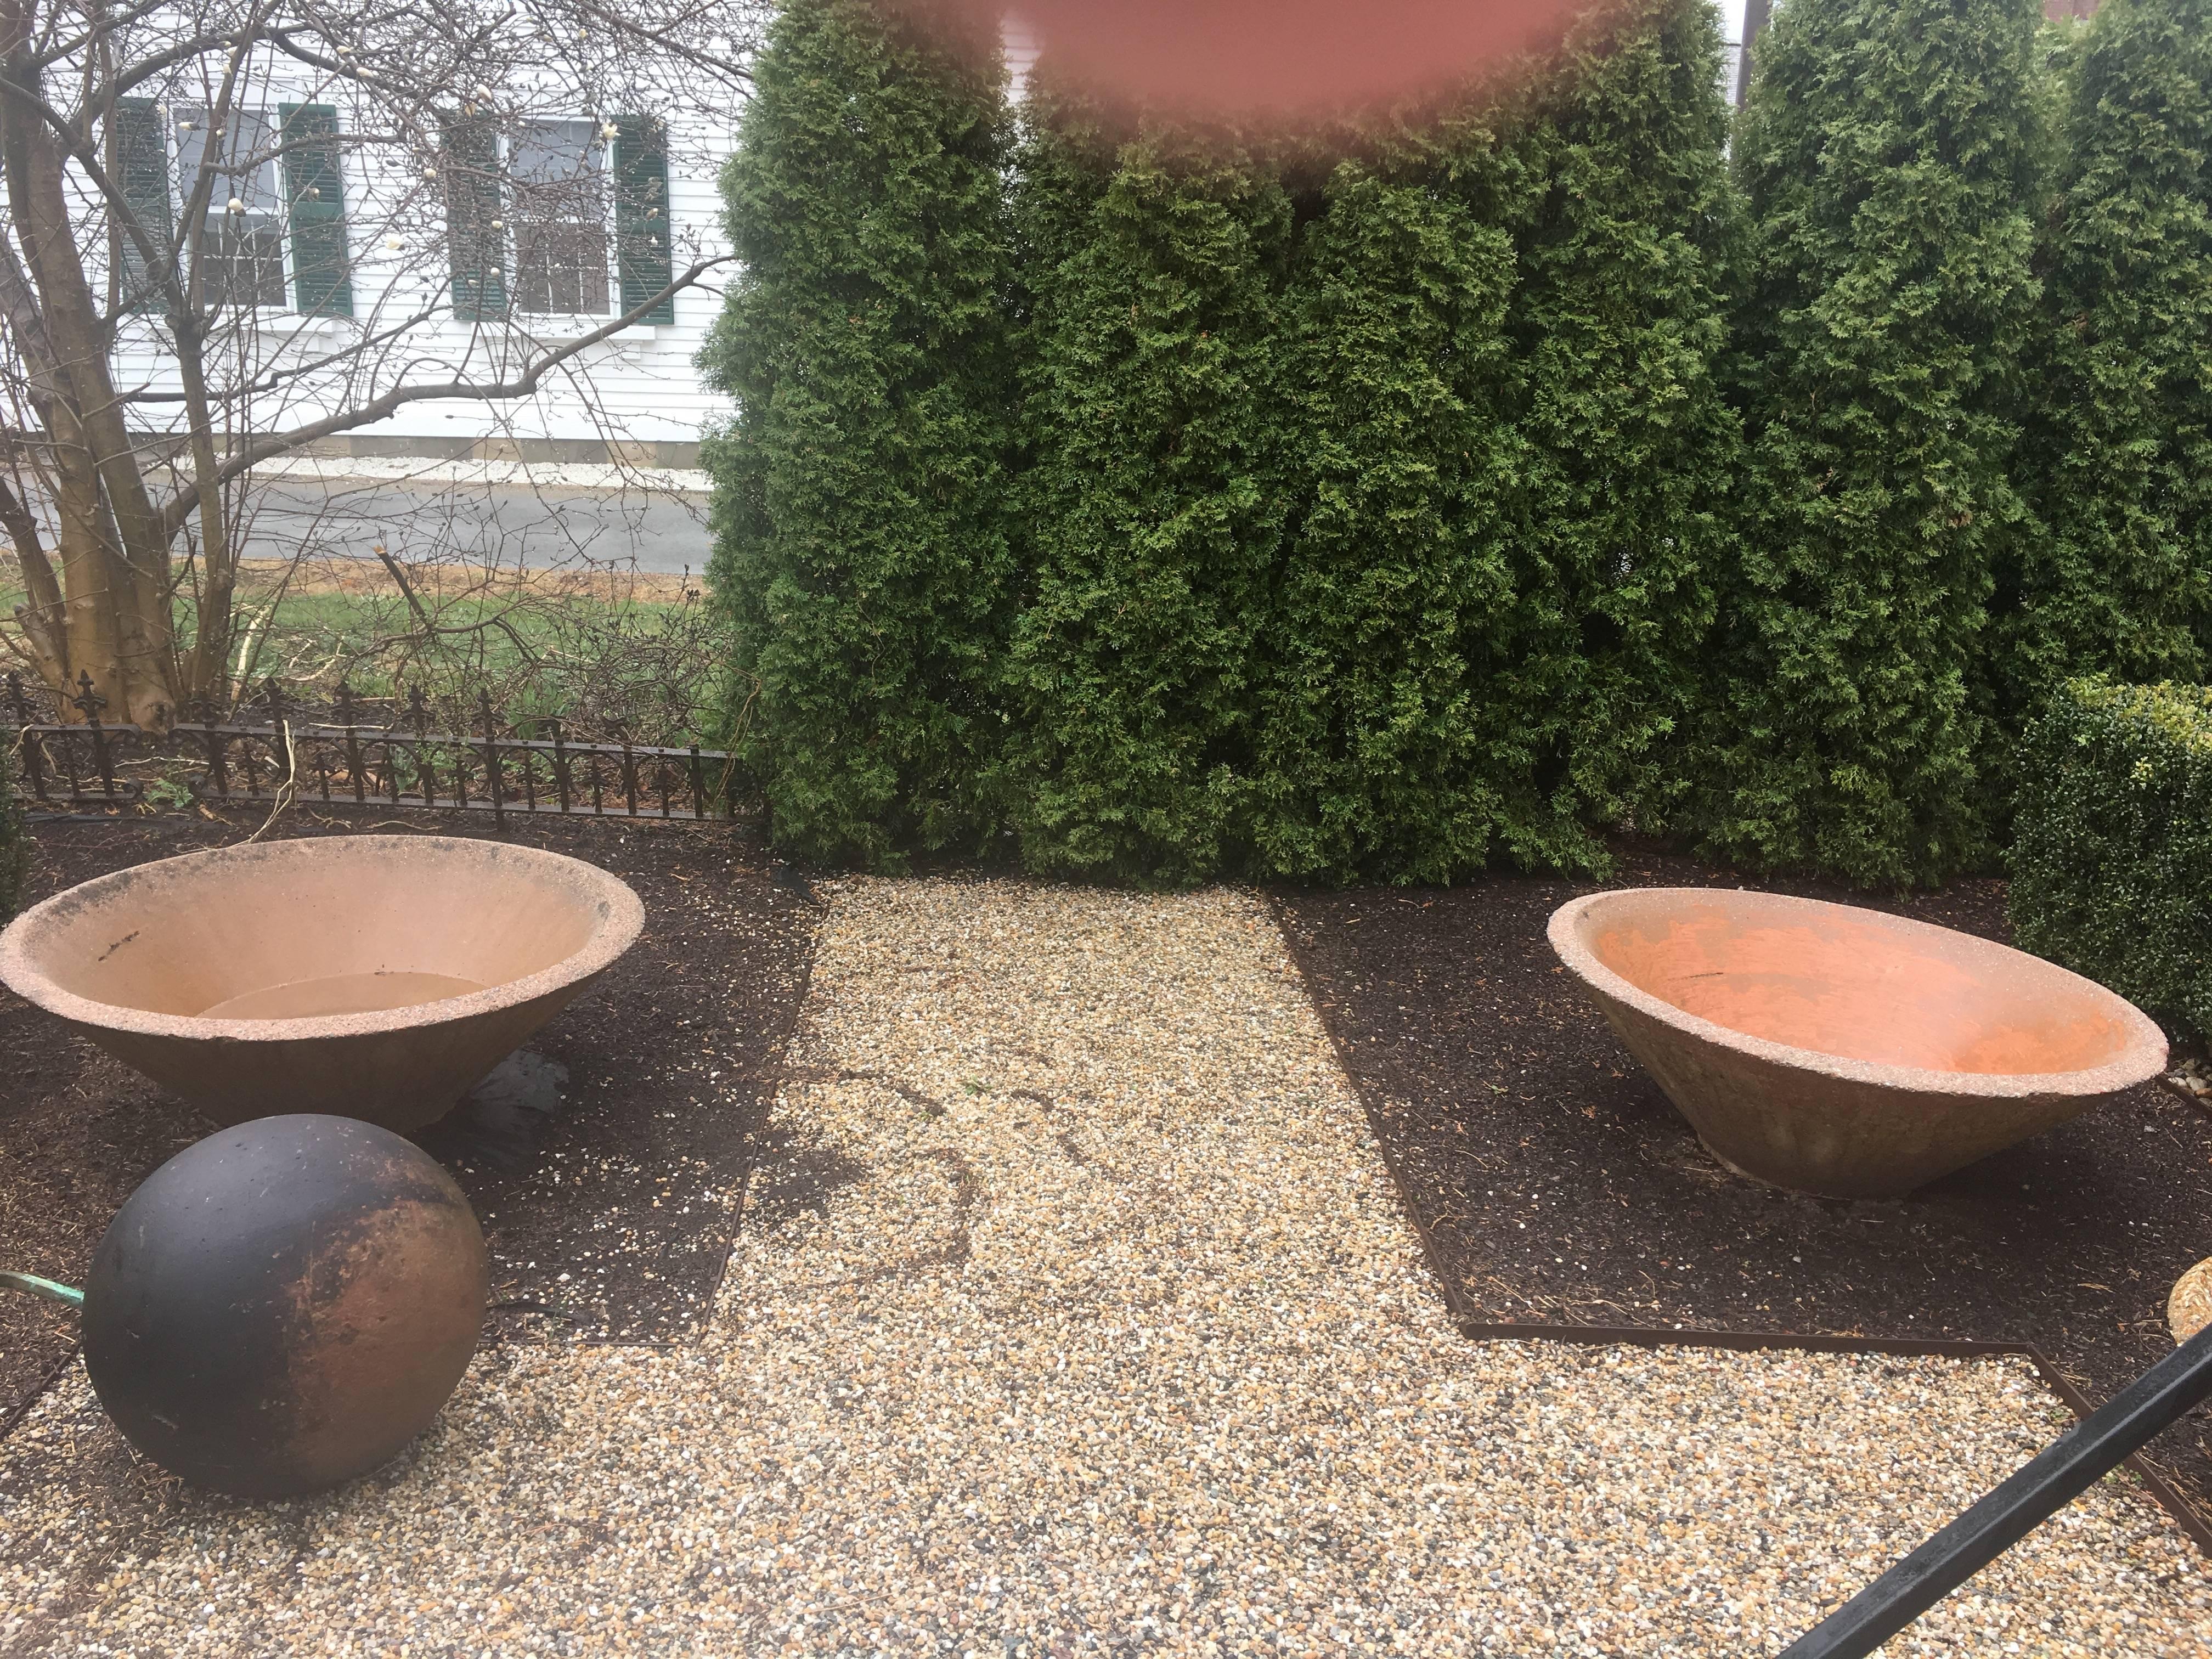 These large canted bowl are just sensational! Made from a pinkish cast stone with heavy grey pebble aggregate (visible on the rims), these will accommodate even the largest and most profuse plantings. The outsides have faded to a lighter pinky-green